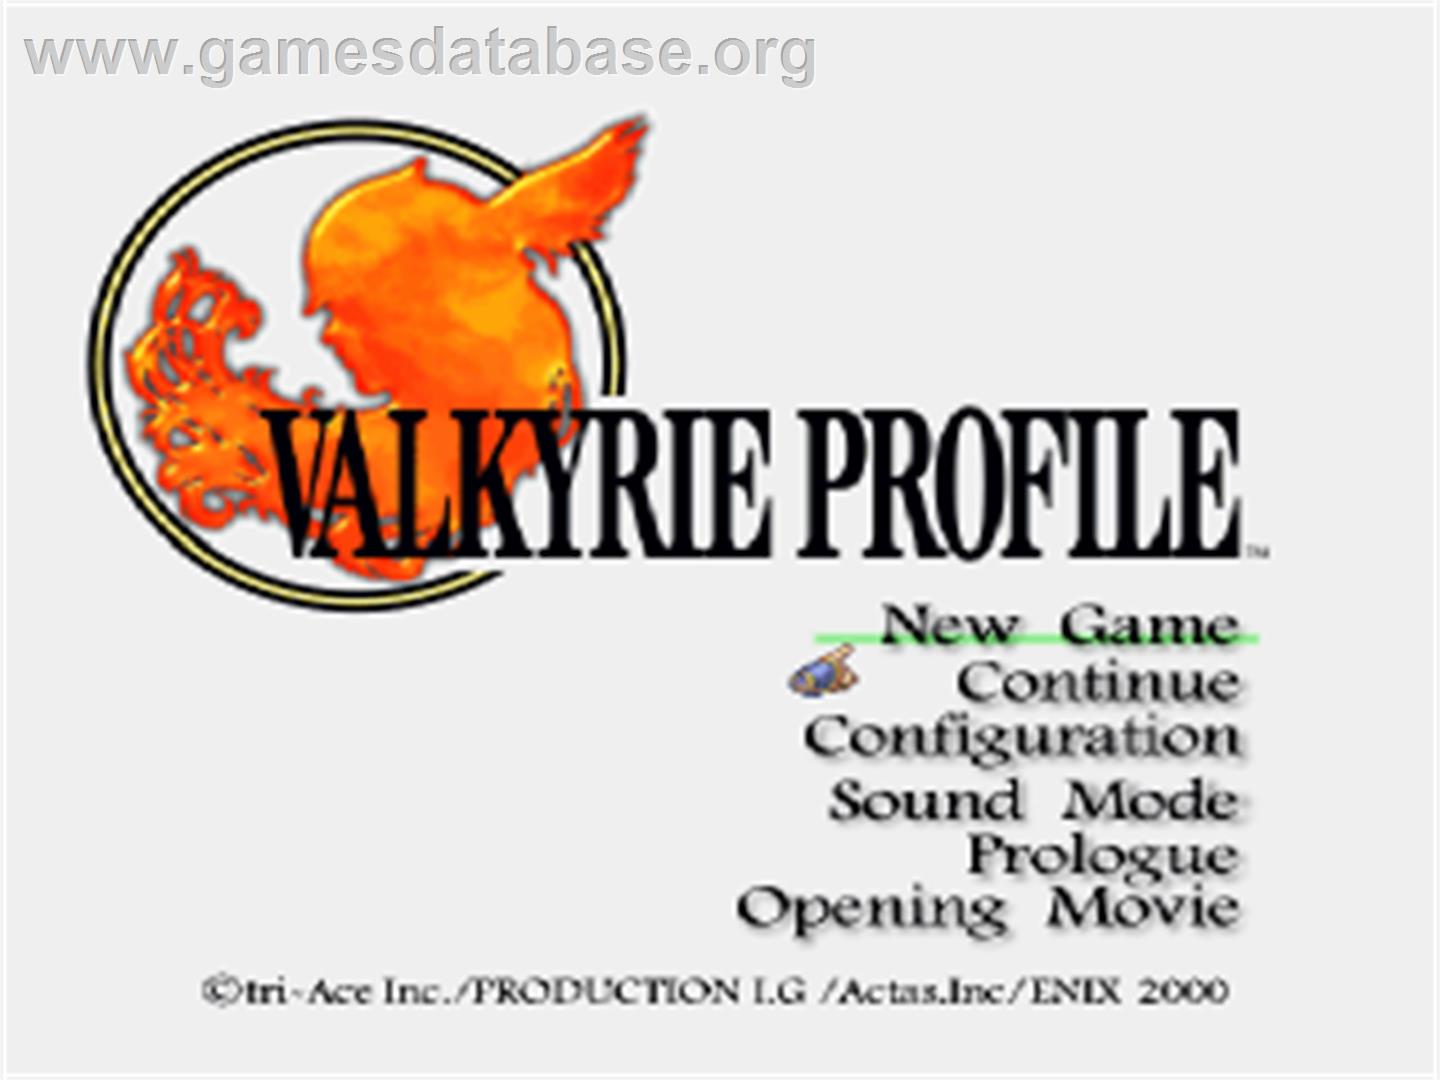 Valkyrie Profile - Sony Playstation - Artwork - Title Screen